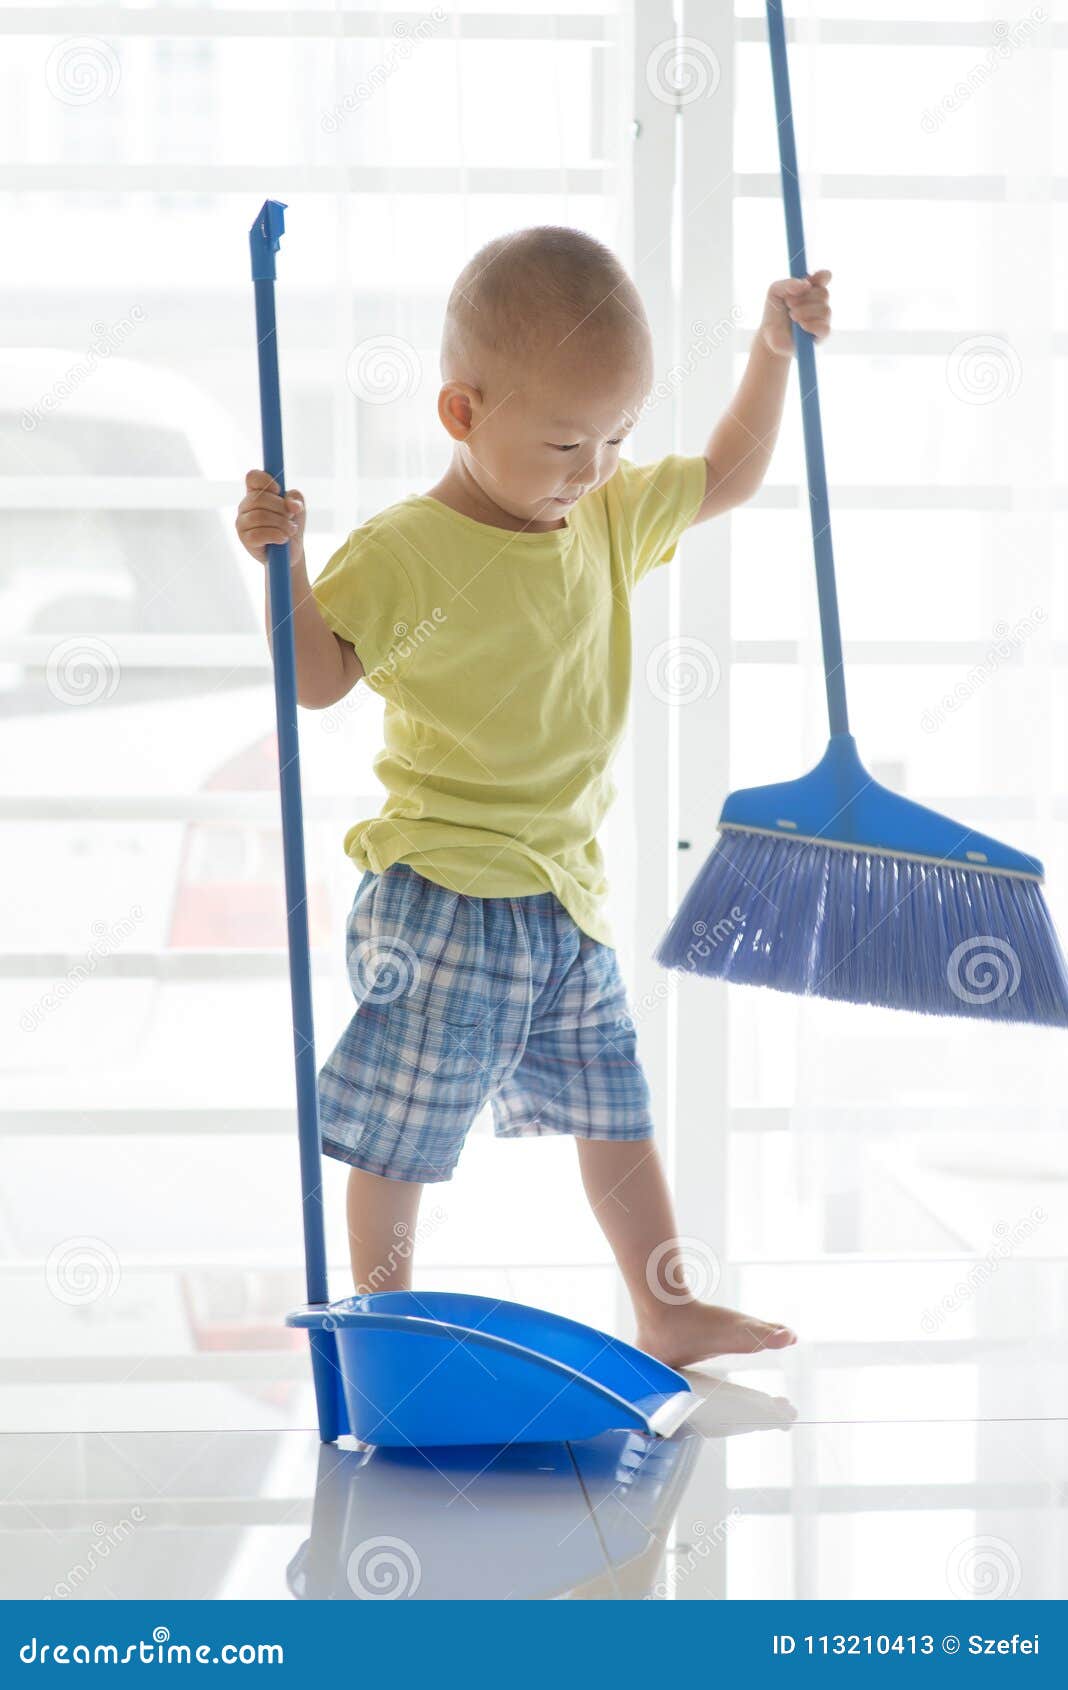 https://thumbs.dreamstime.com/z/asian-baby-boy-sweeping-floor-broom-young-child-doing-house-chores-home-toddler-sweeping-floor-113210413.jpg